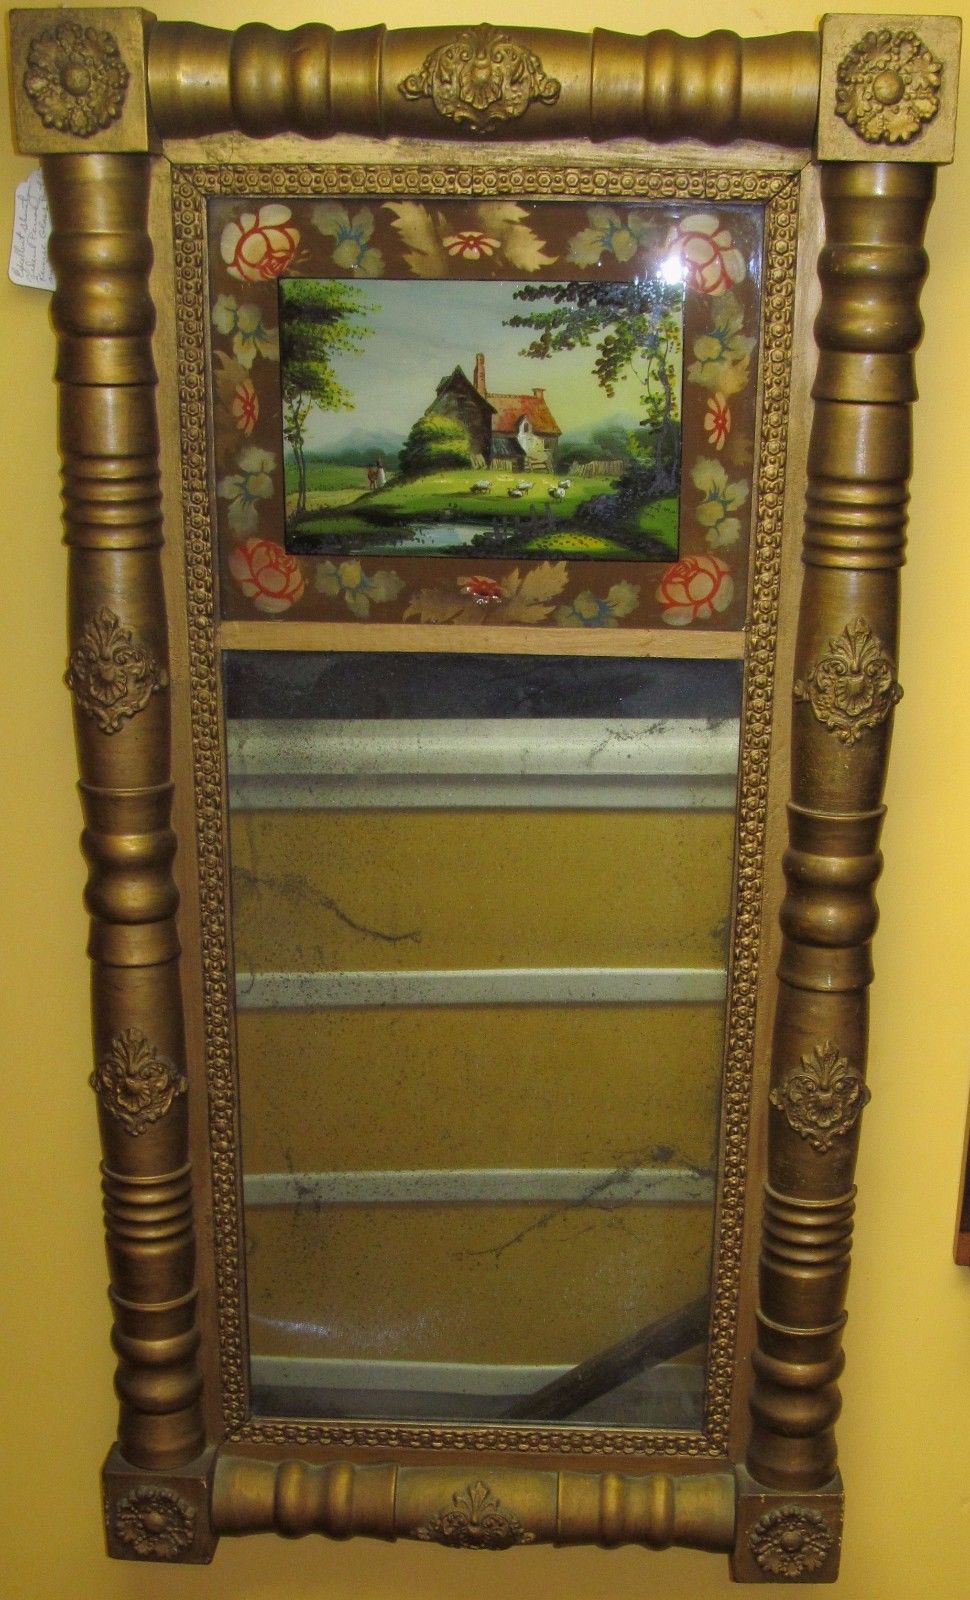 EARLY 19TH CENTURY SHERATON FEDERAL PERIOD REVERSE GLASS PAINTED MIRROR